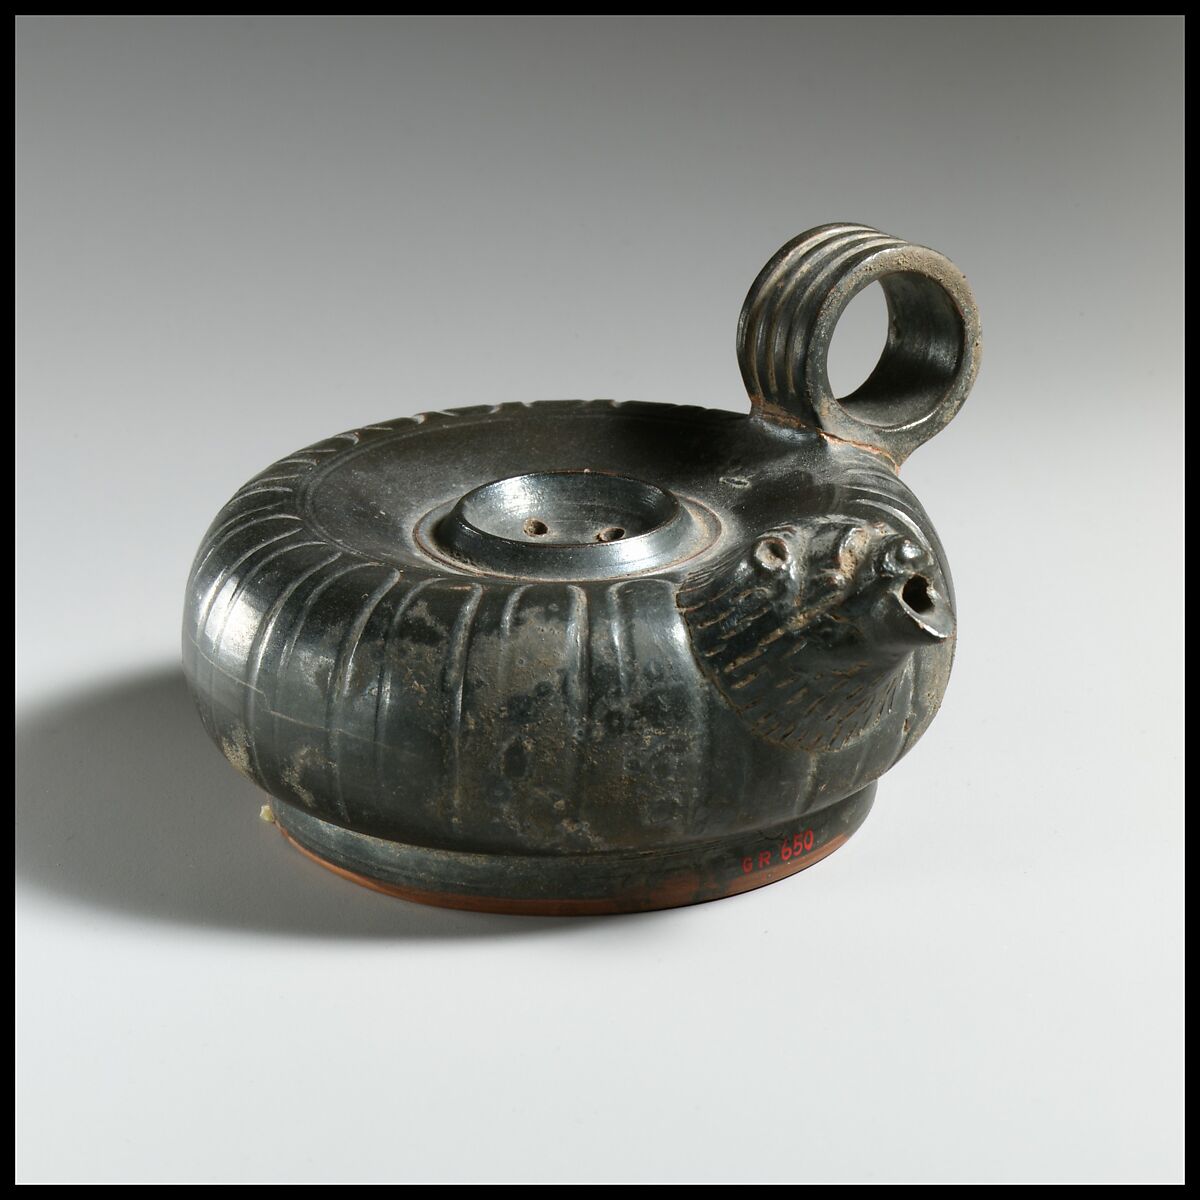 Terracotta guttus (flask with handle and spout), Terracotta, Greek, South Italian, Campanian 